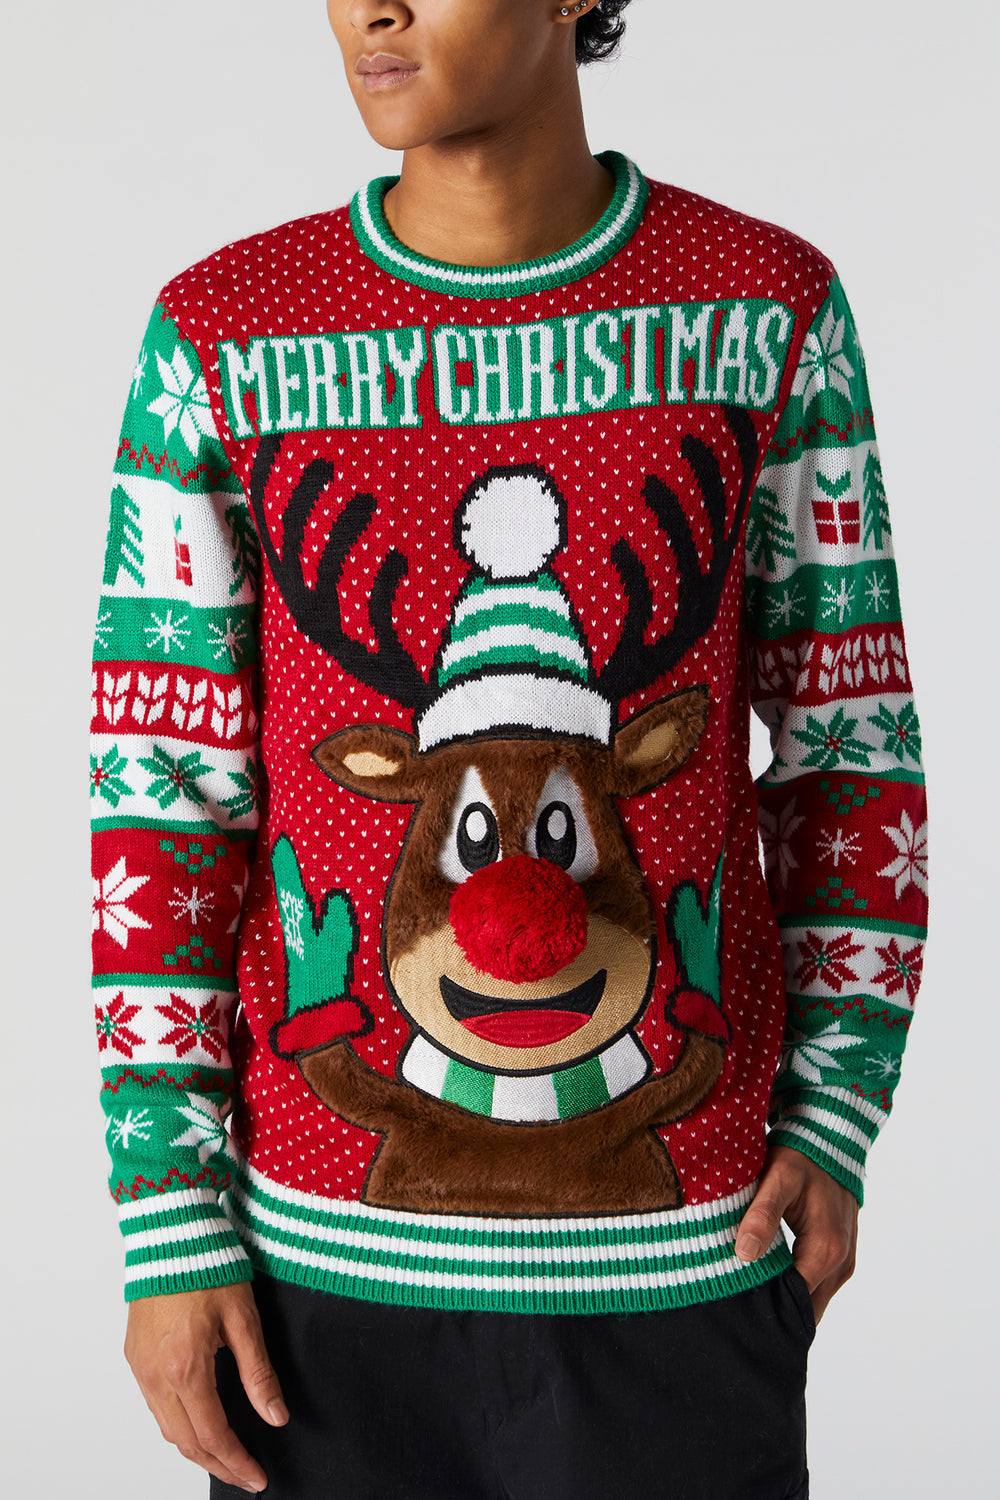 Furry Rudolph Ugly Xmas Sweater Furry Rudolph Ugly Xmas Sweater 4